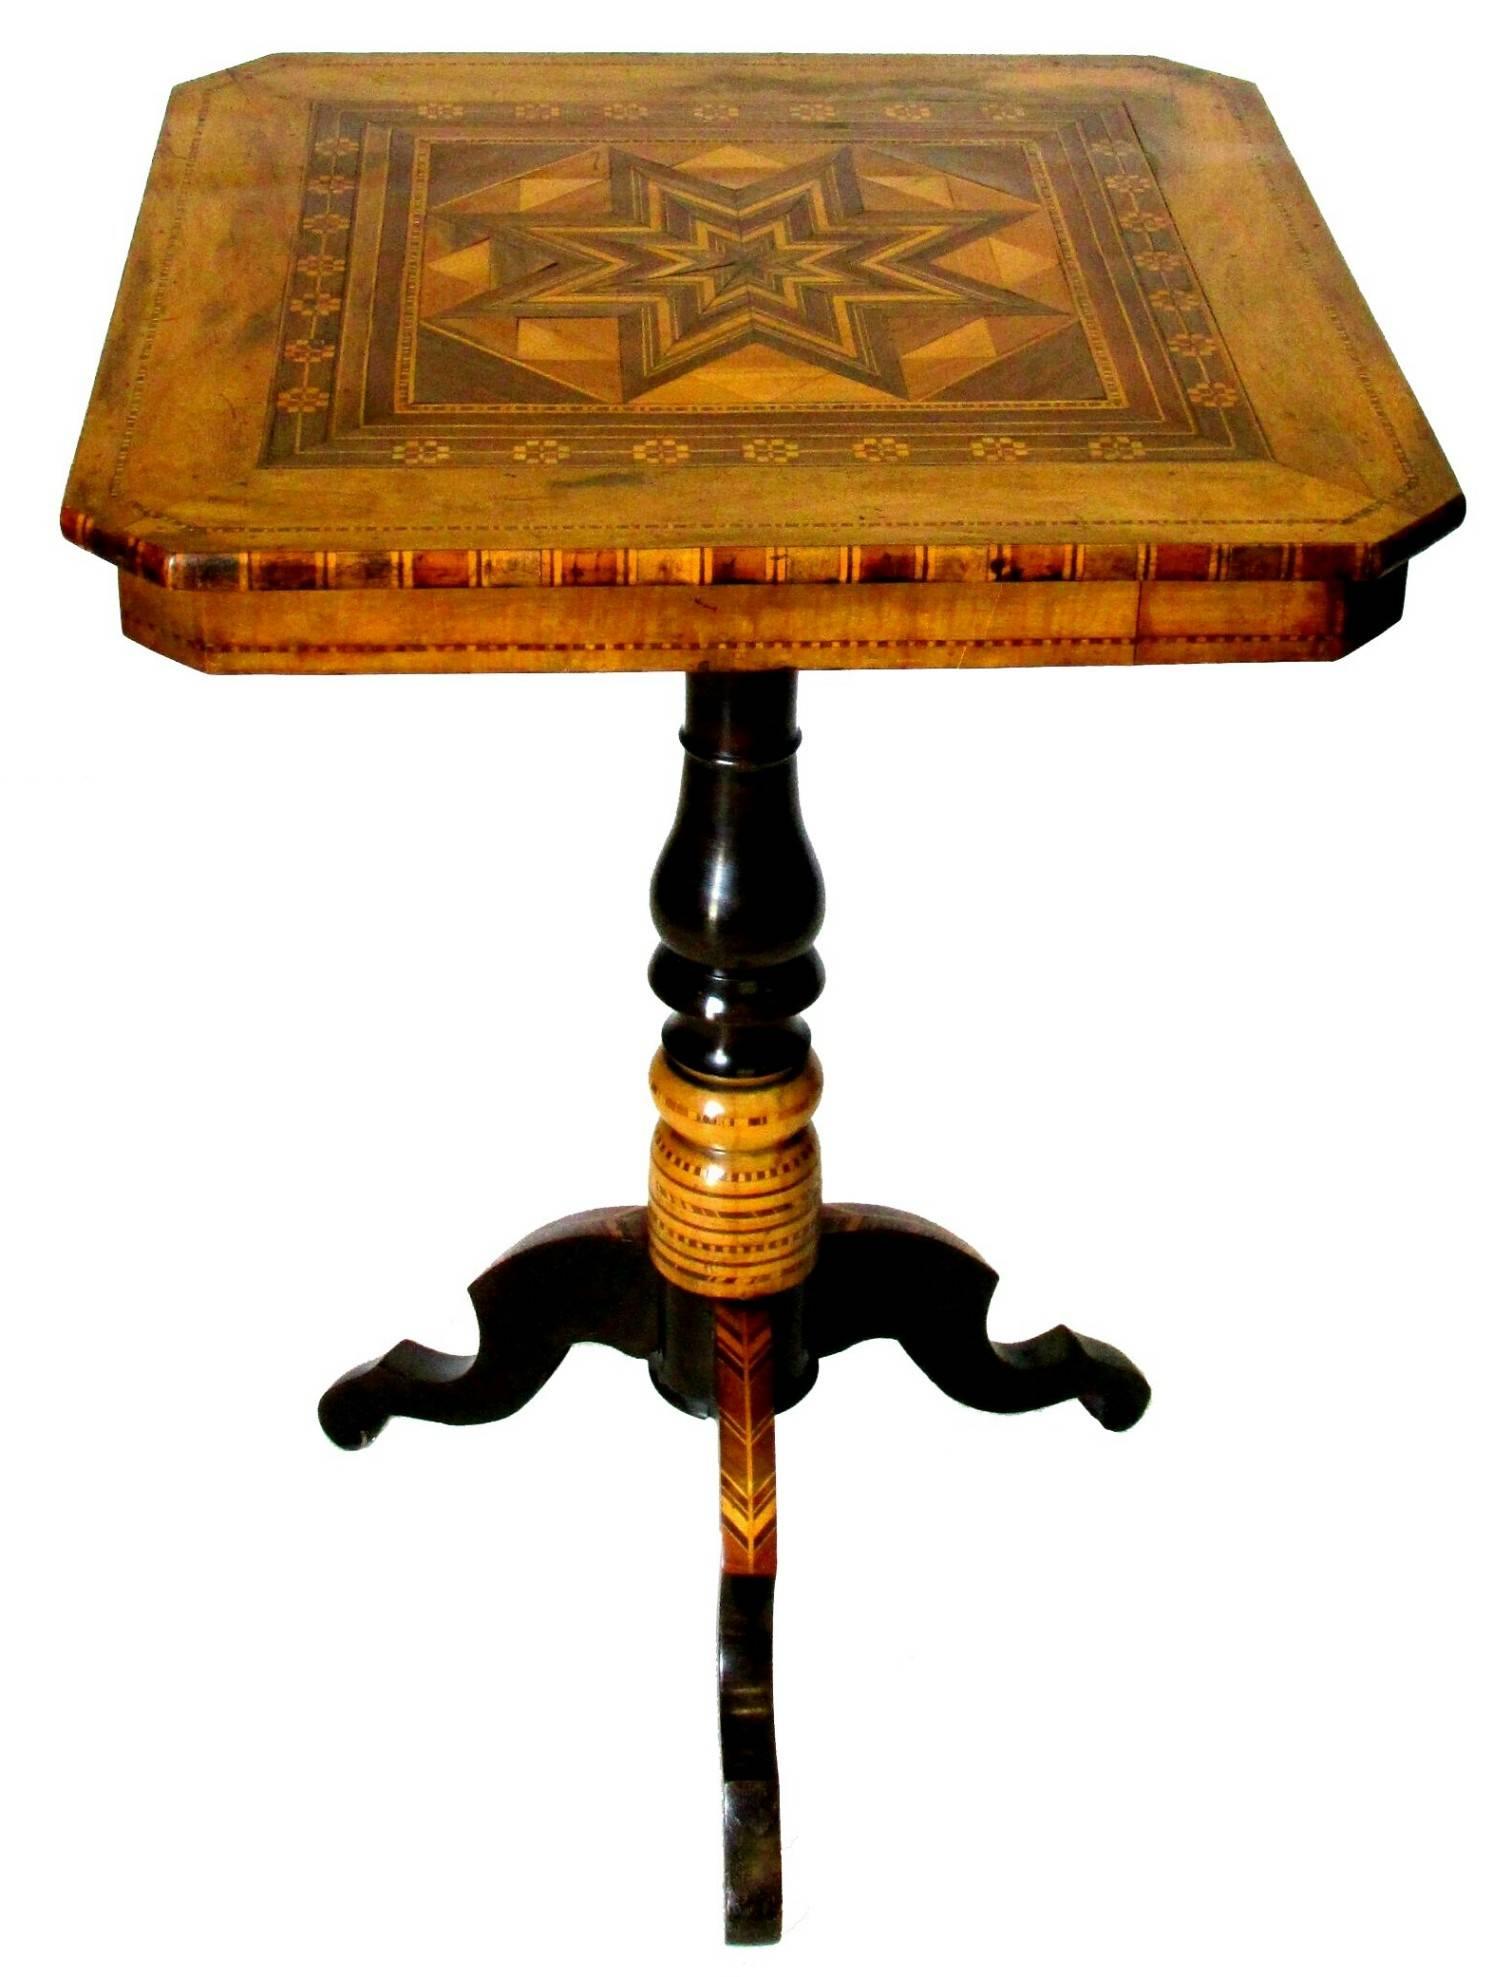 A stunning 2 part Sorrento parquetry side / end table, showing a squared top with canted corners inlaid with contrasting light & dark geometric panels of fruitwood, attached to a turned & ebonized column similarly decorated with inlaid segments of